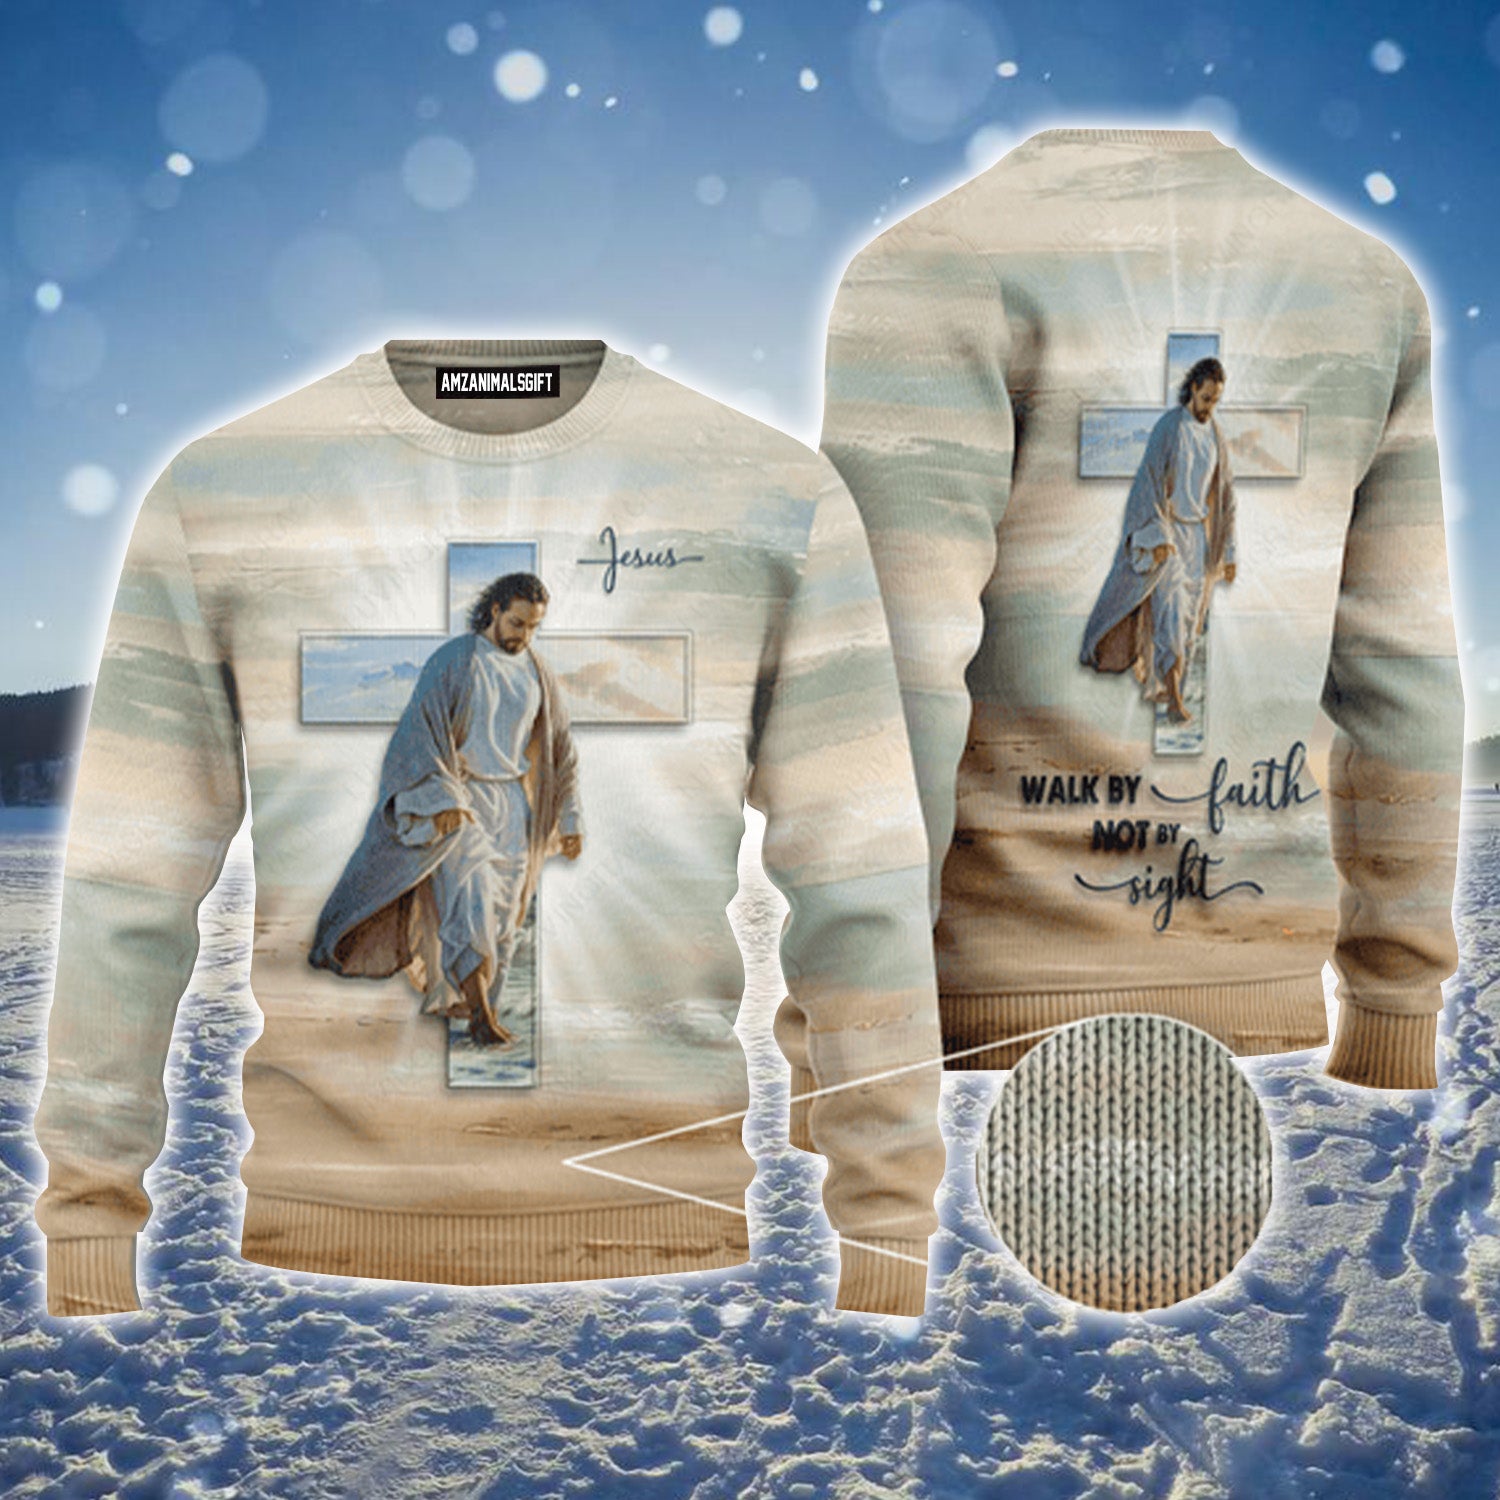 Jesus Christ Walk On Beach Walk By Faith Not By Sight Urly Sweater, Christmas Sweater For Men & Women - Perfect Gift For New Year, Winter, Christmas